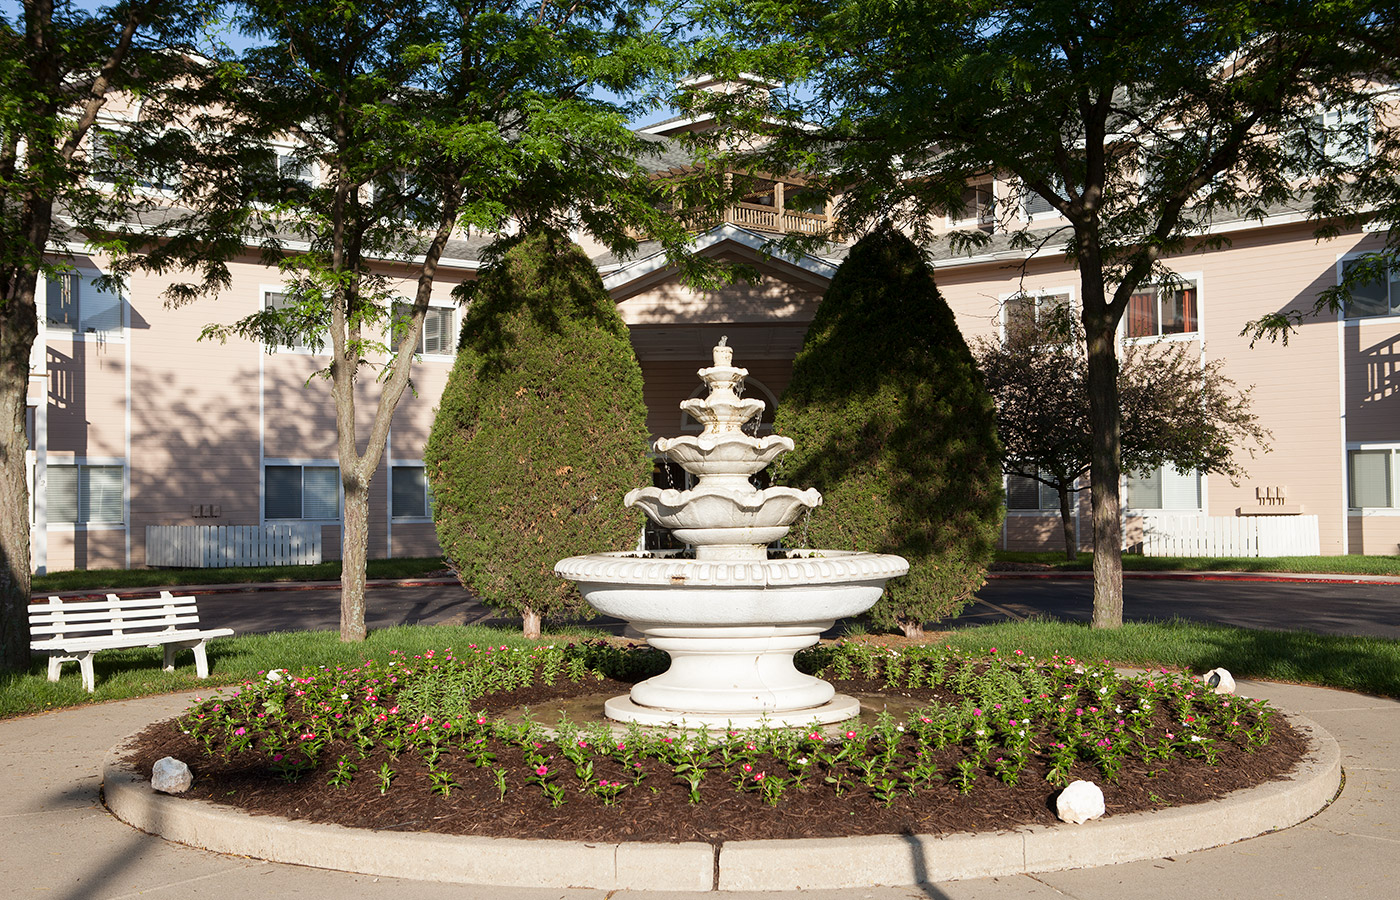 The courtyard at The Fountains at Greenbriar.